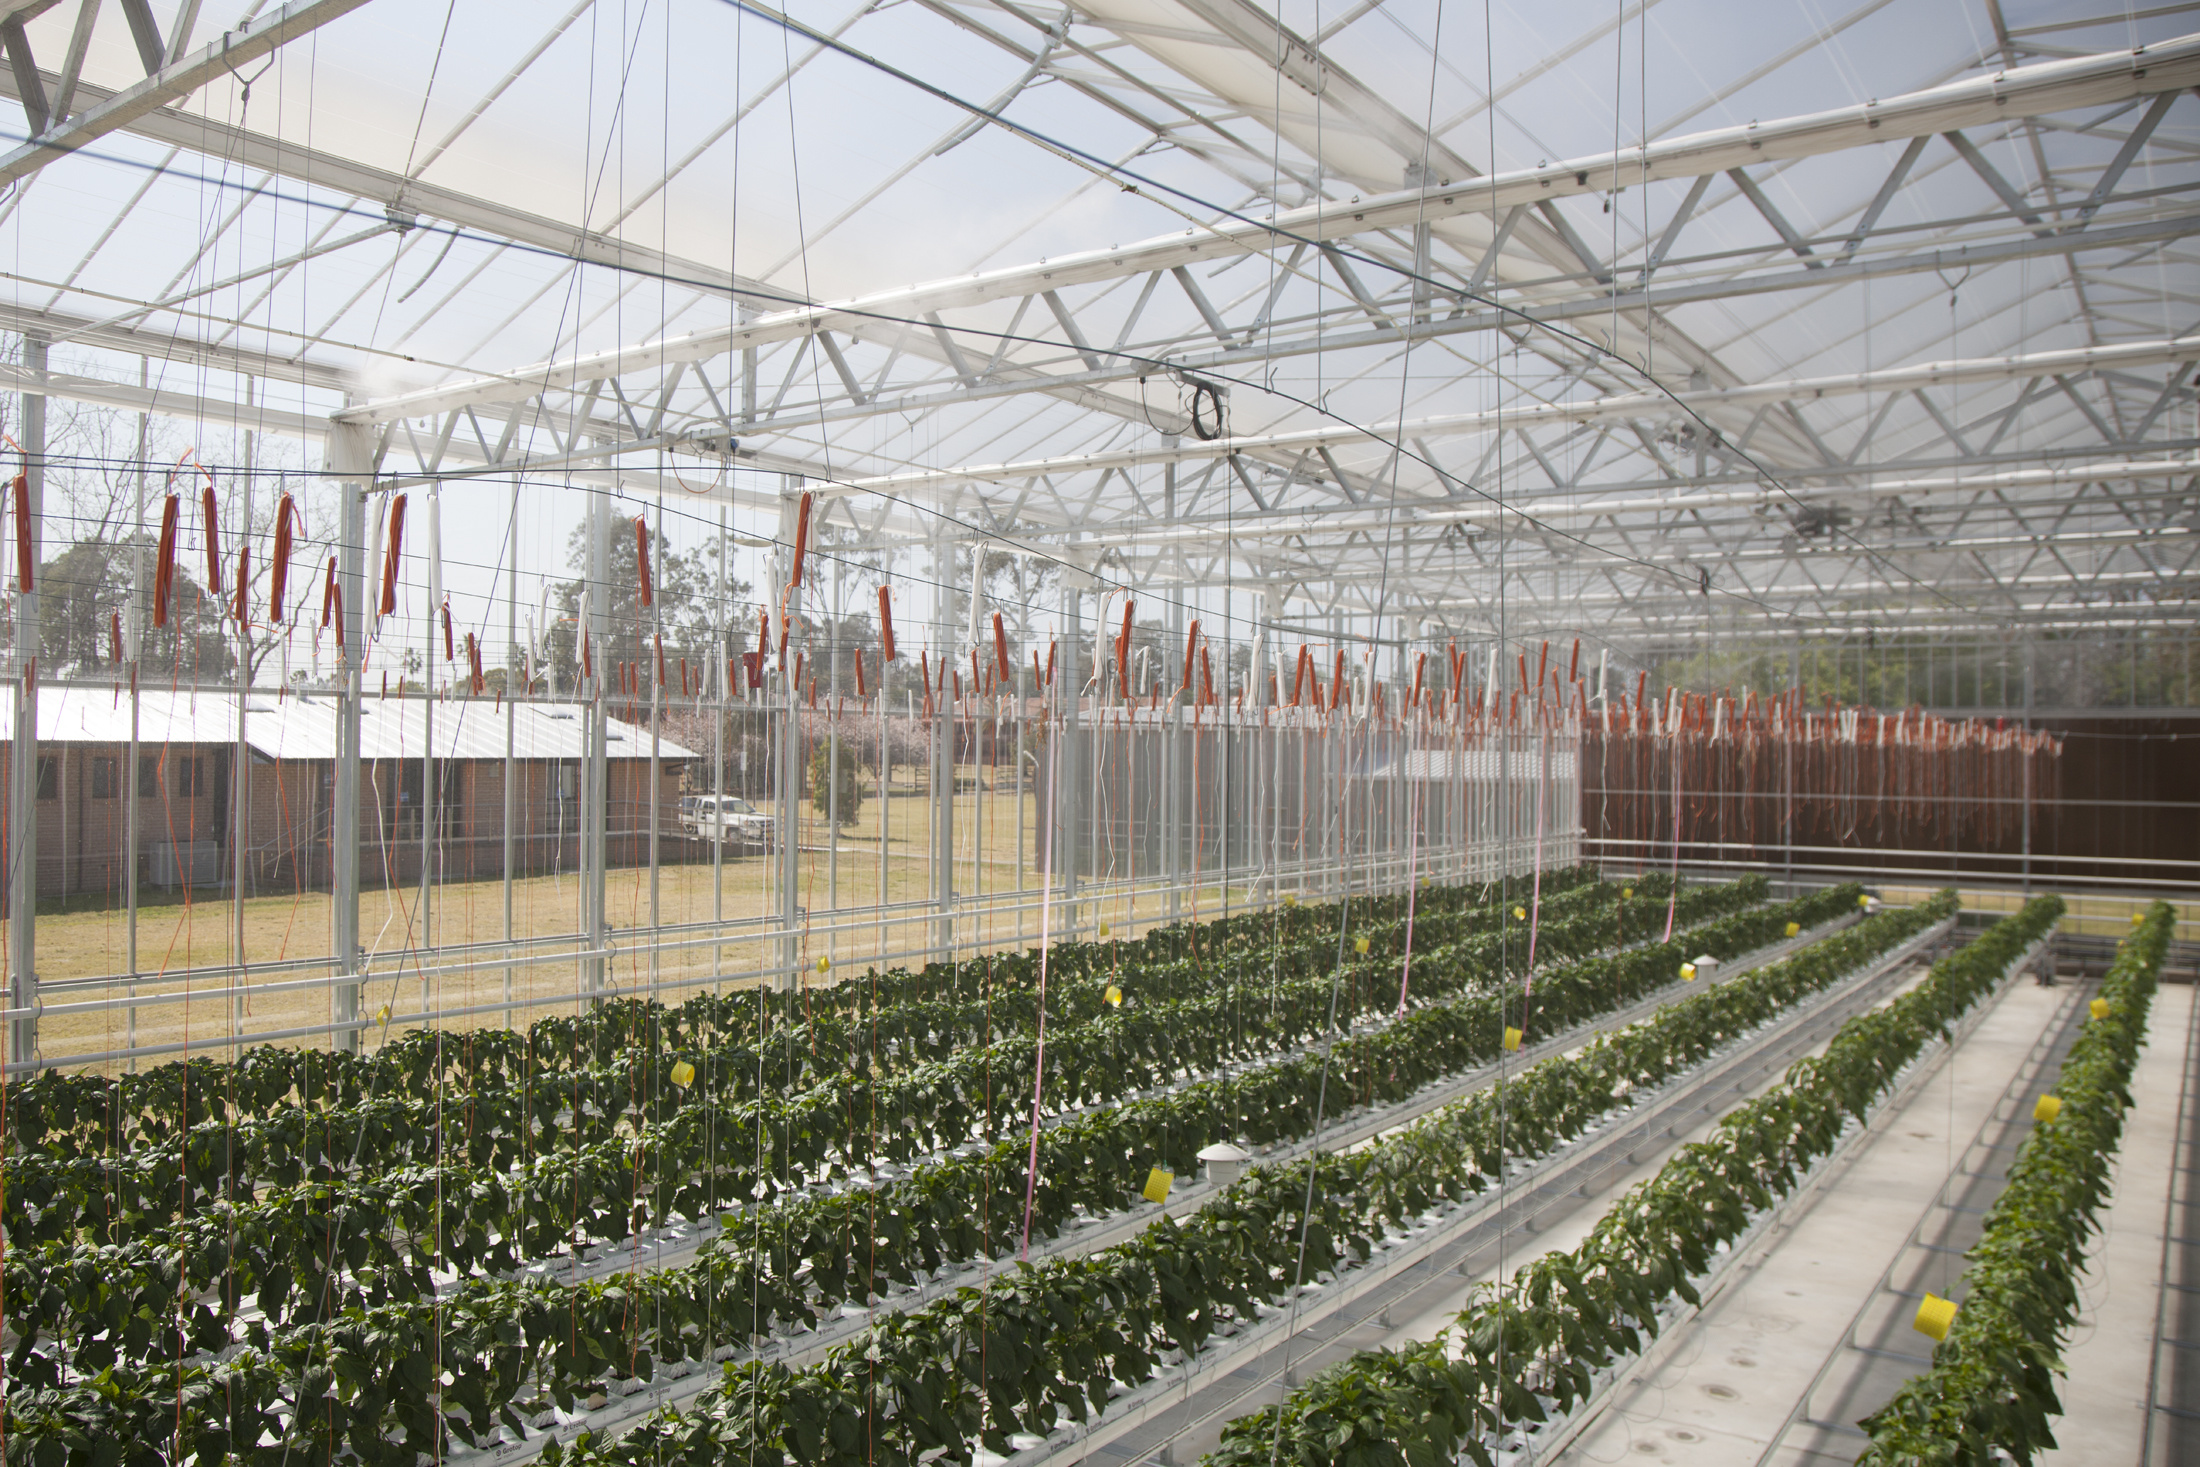 The Greenhouse facilitates food security research to help create more efficient crop production and efficient operations.